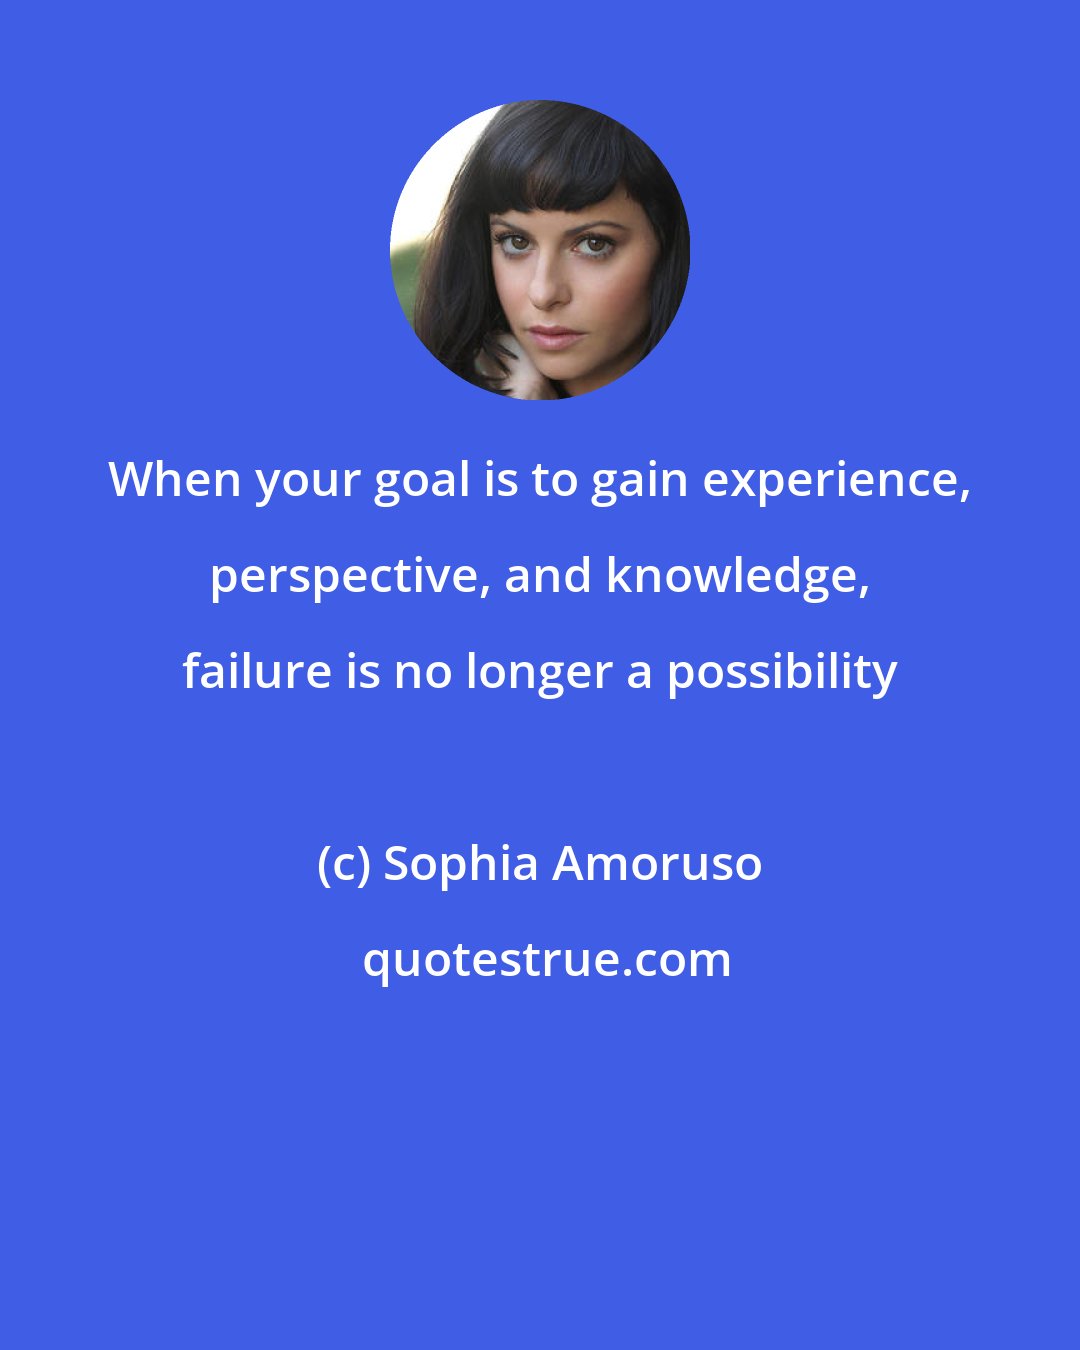 Sophia Amoruso: When your goal is to gain experience, perspective, and knowledge, failure is no longer a possibility